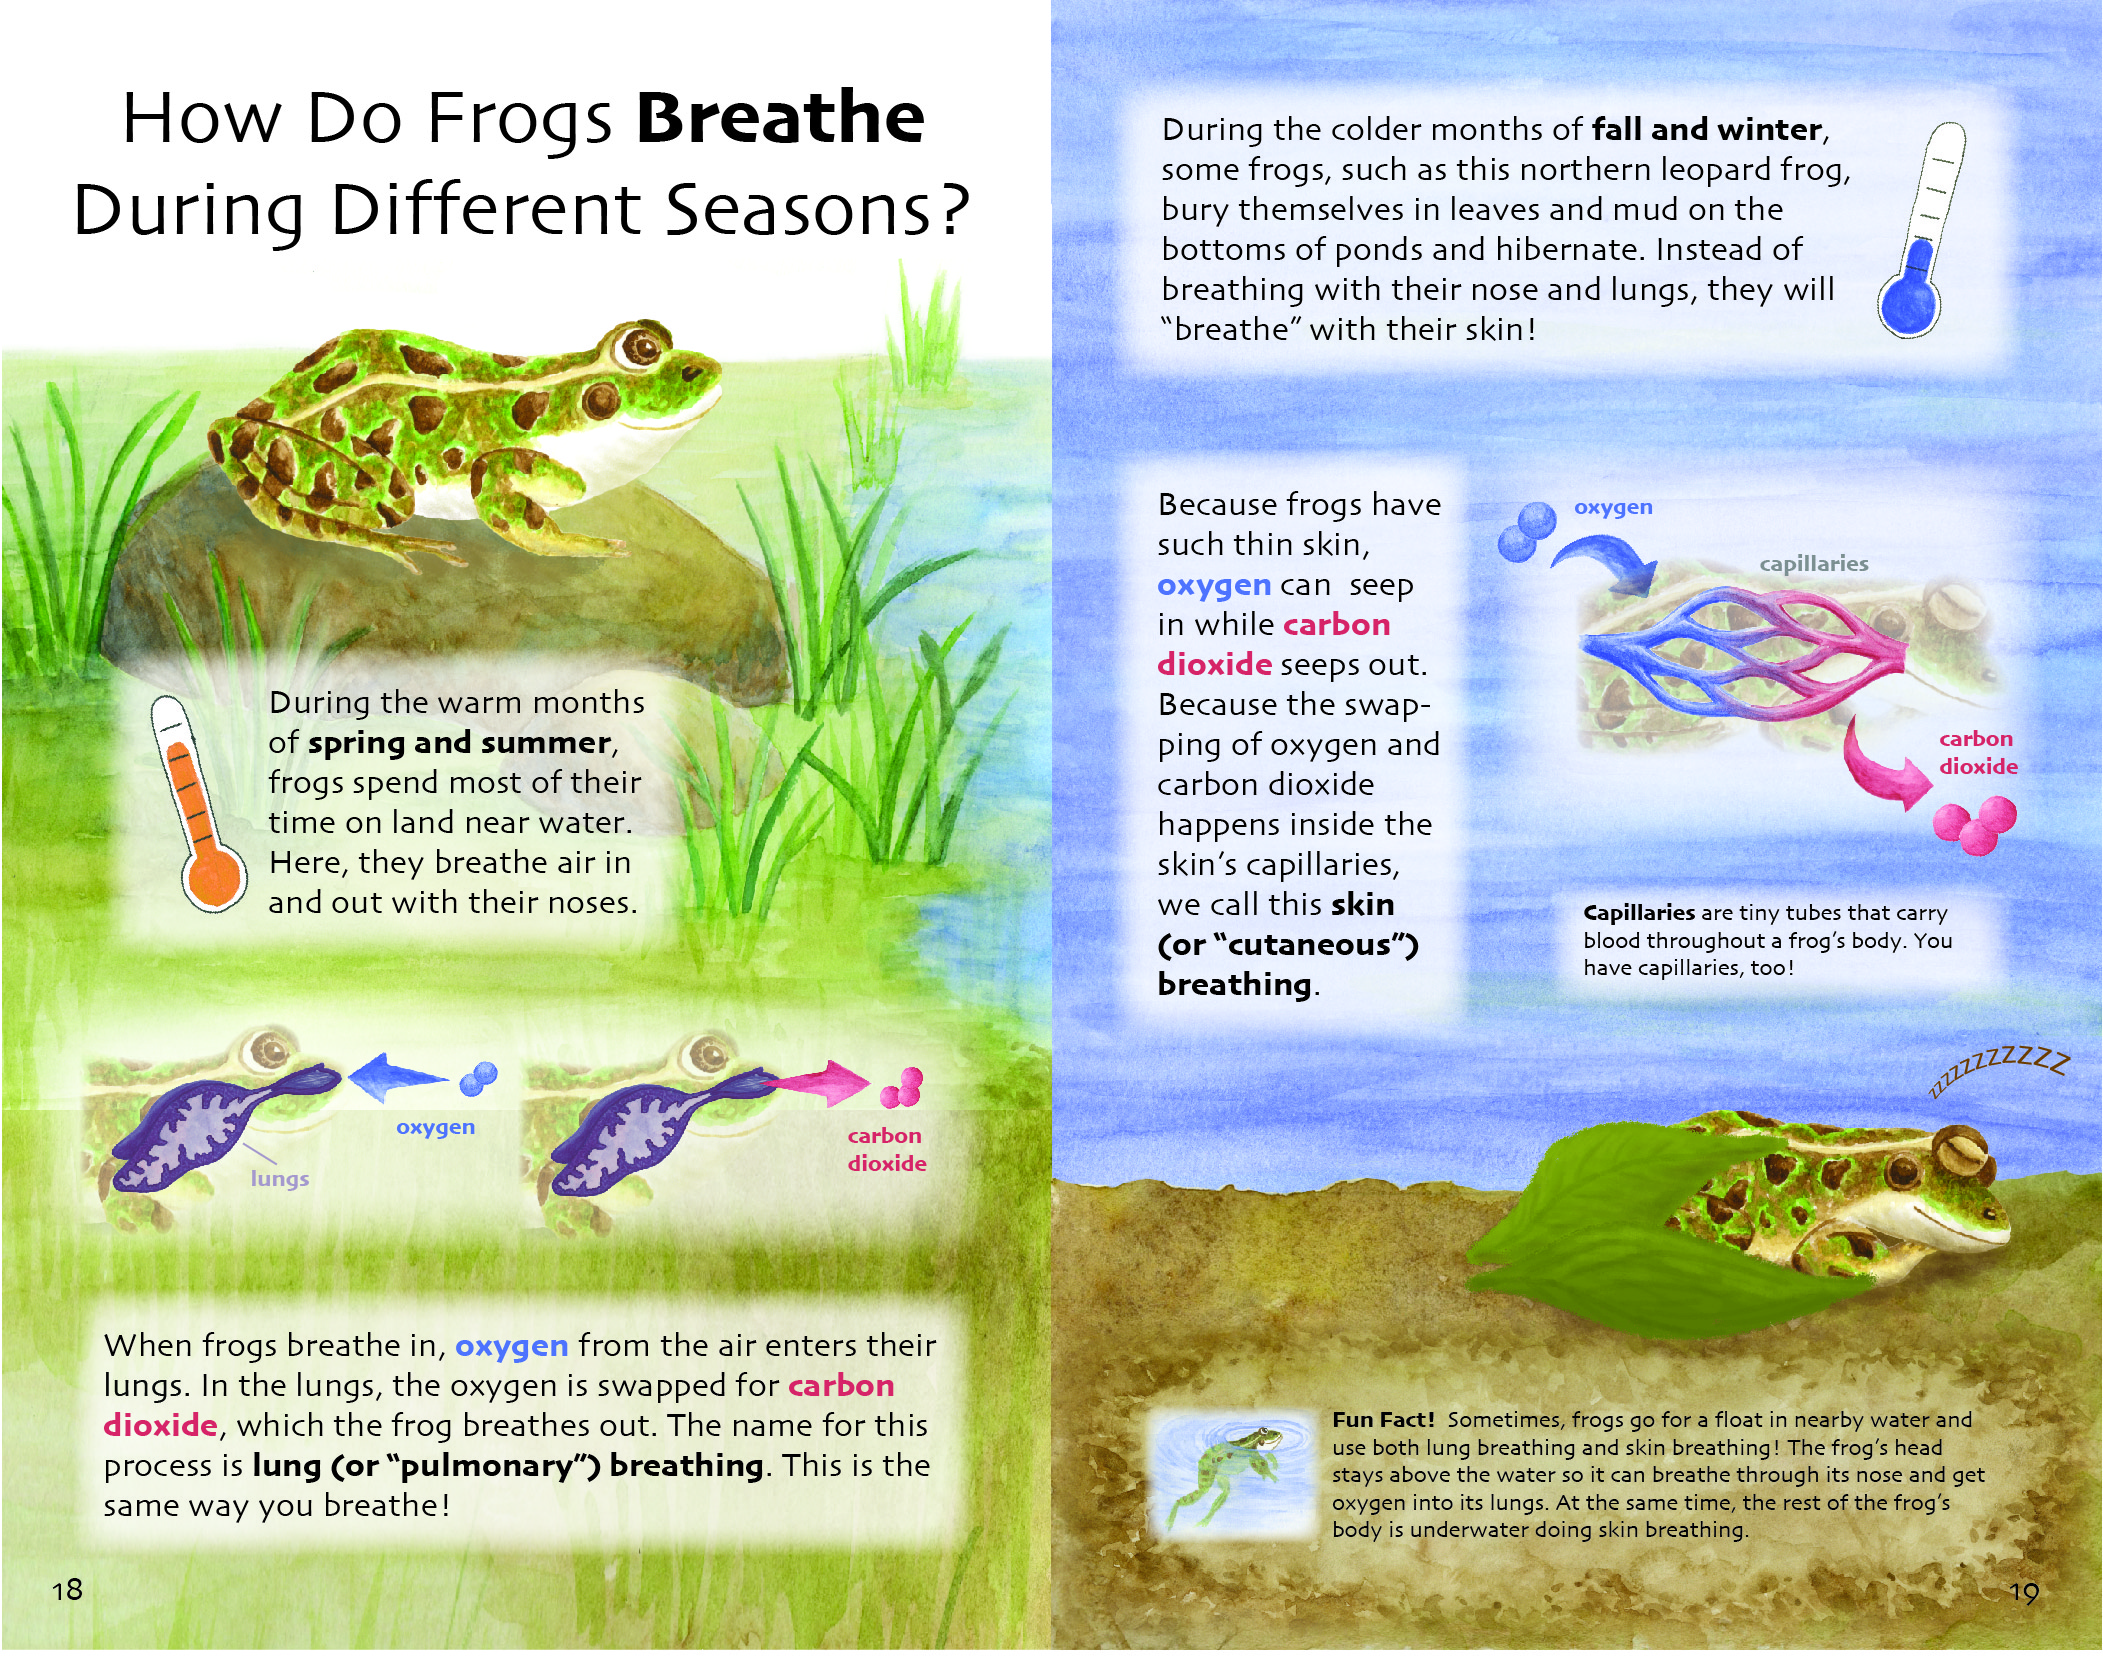 How Do Frogs Breathe During Different Seasons - ArtsEngine